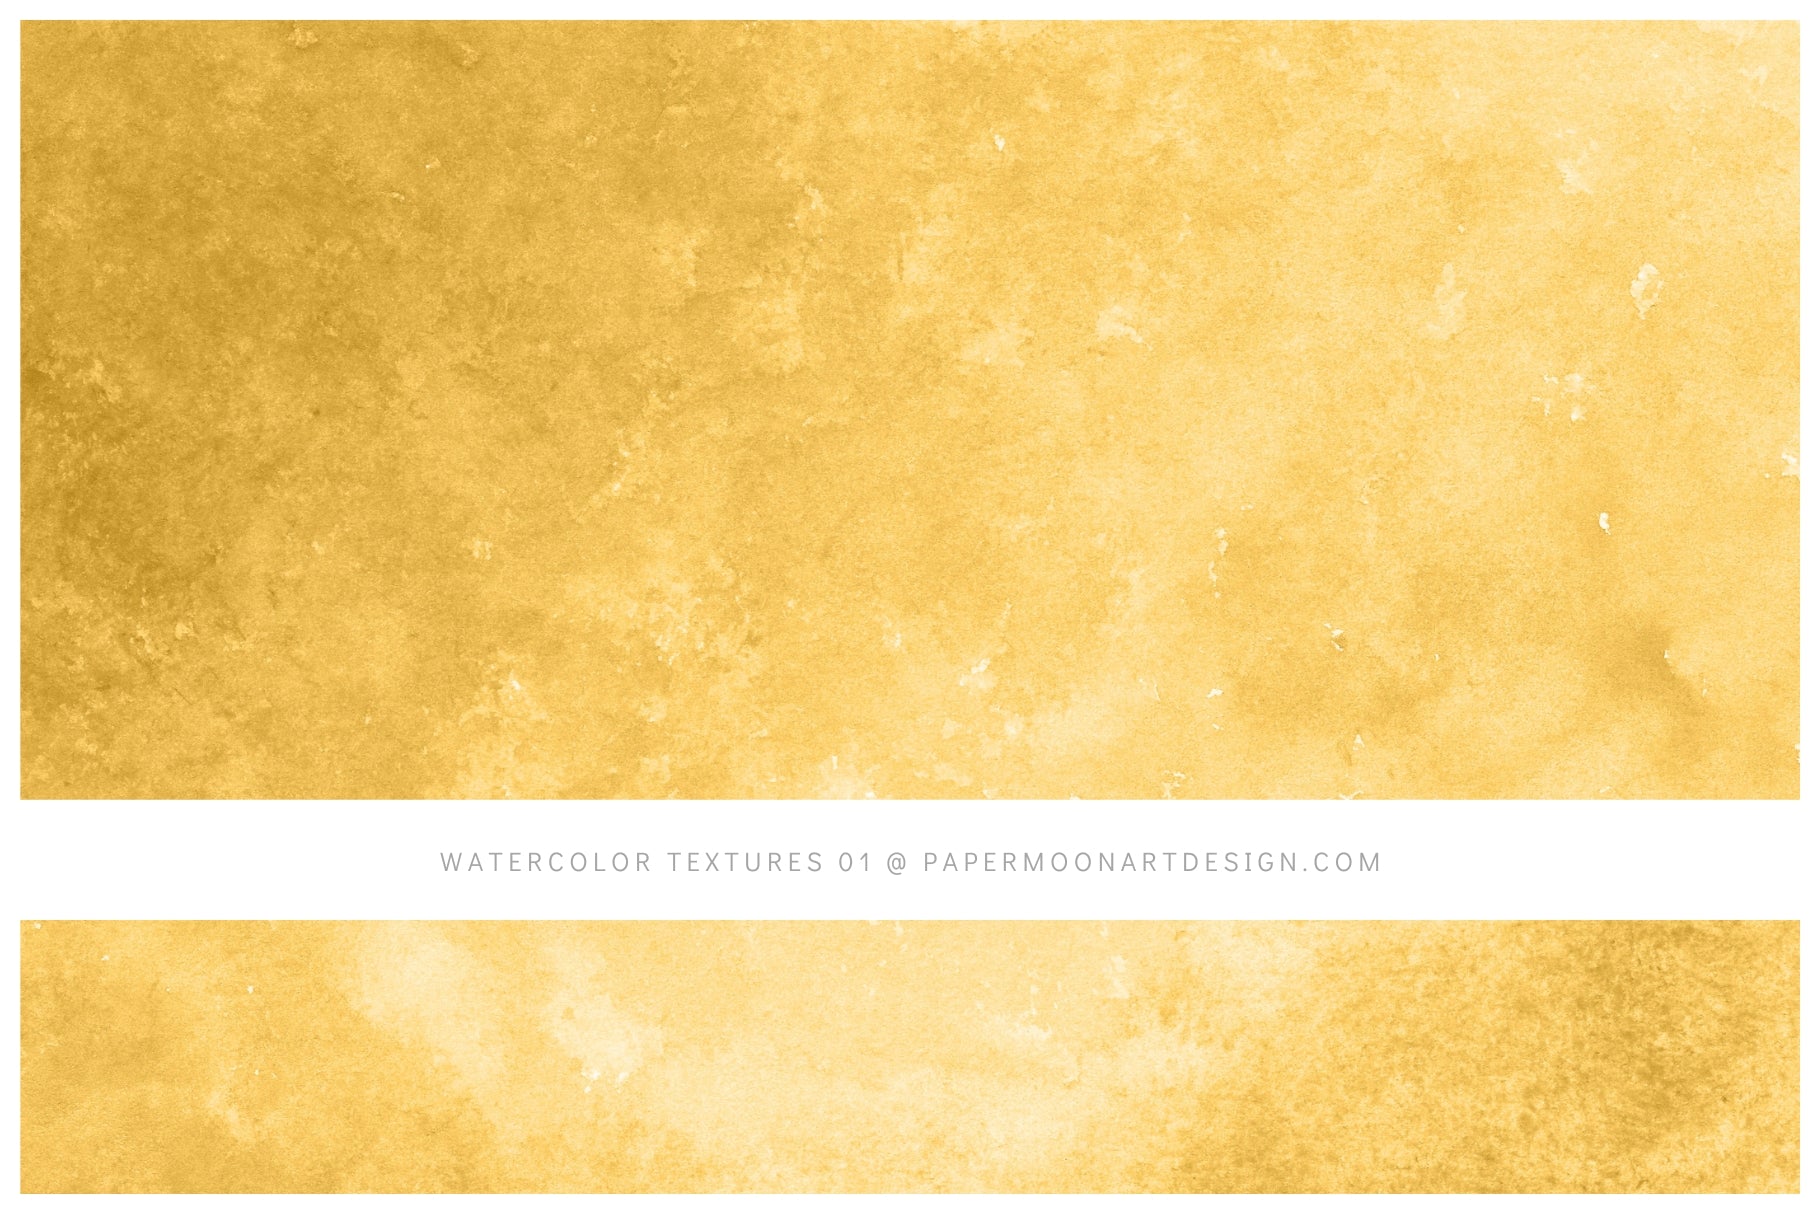 Watercolor Texture Backgrounds 01 Yellow Gold Watercolor Textures